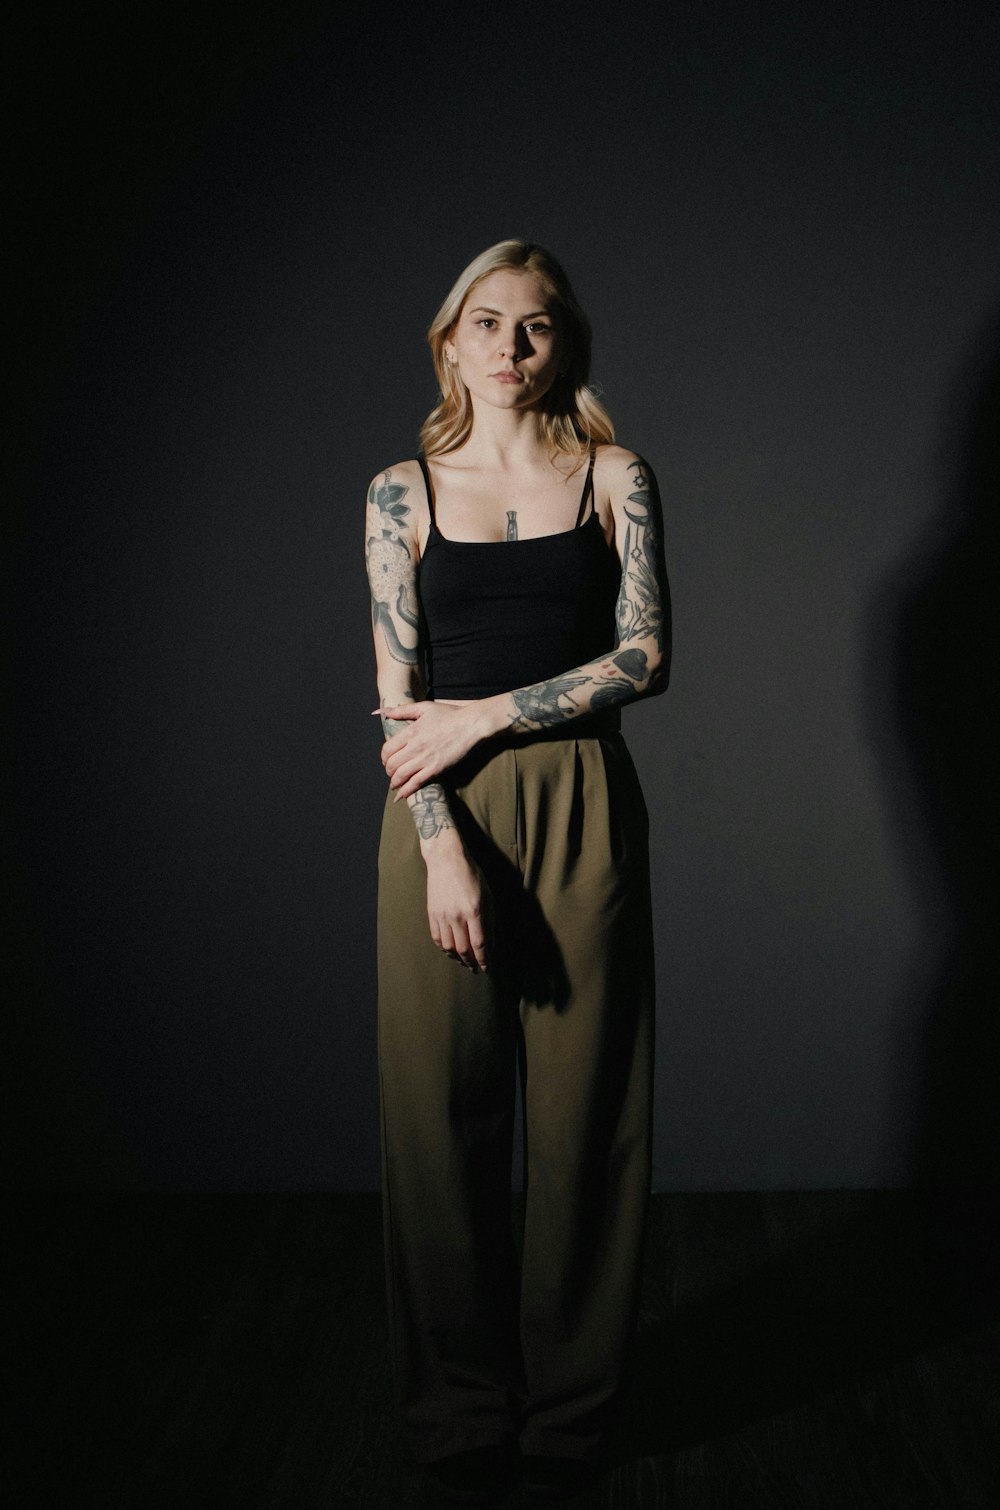 a woman with tattoos standing in a dark room